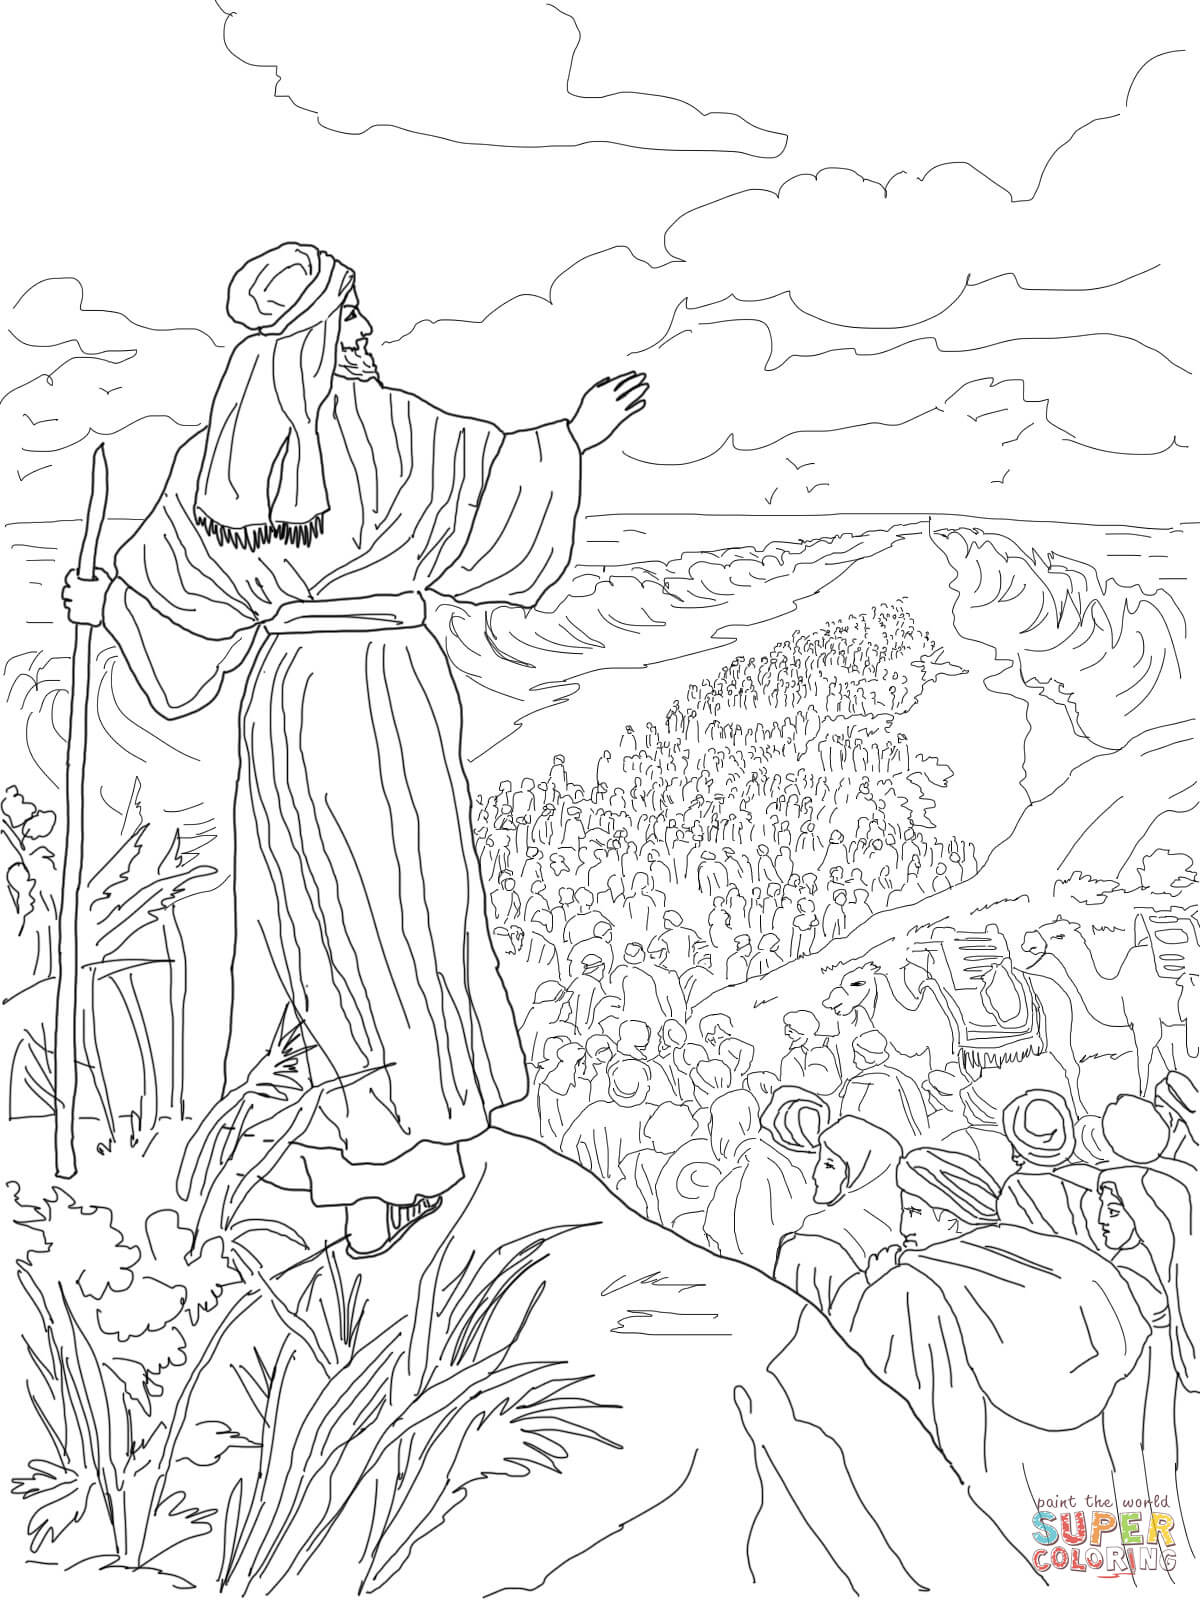 Israelites Crossing the Red Sea coloring page | Free Printable